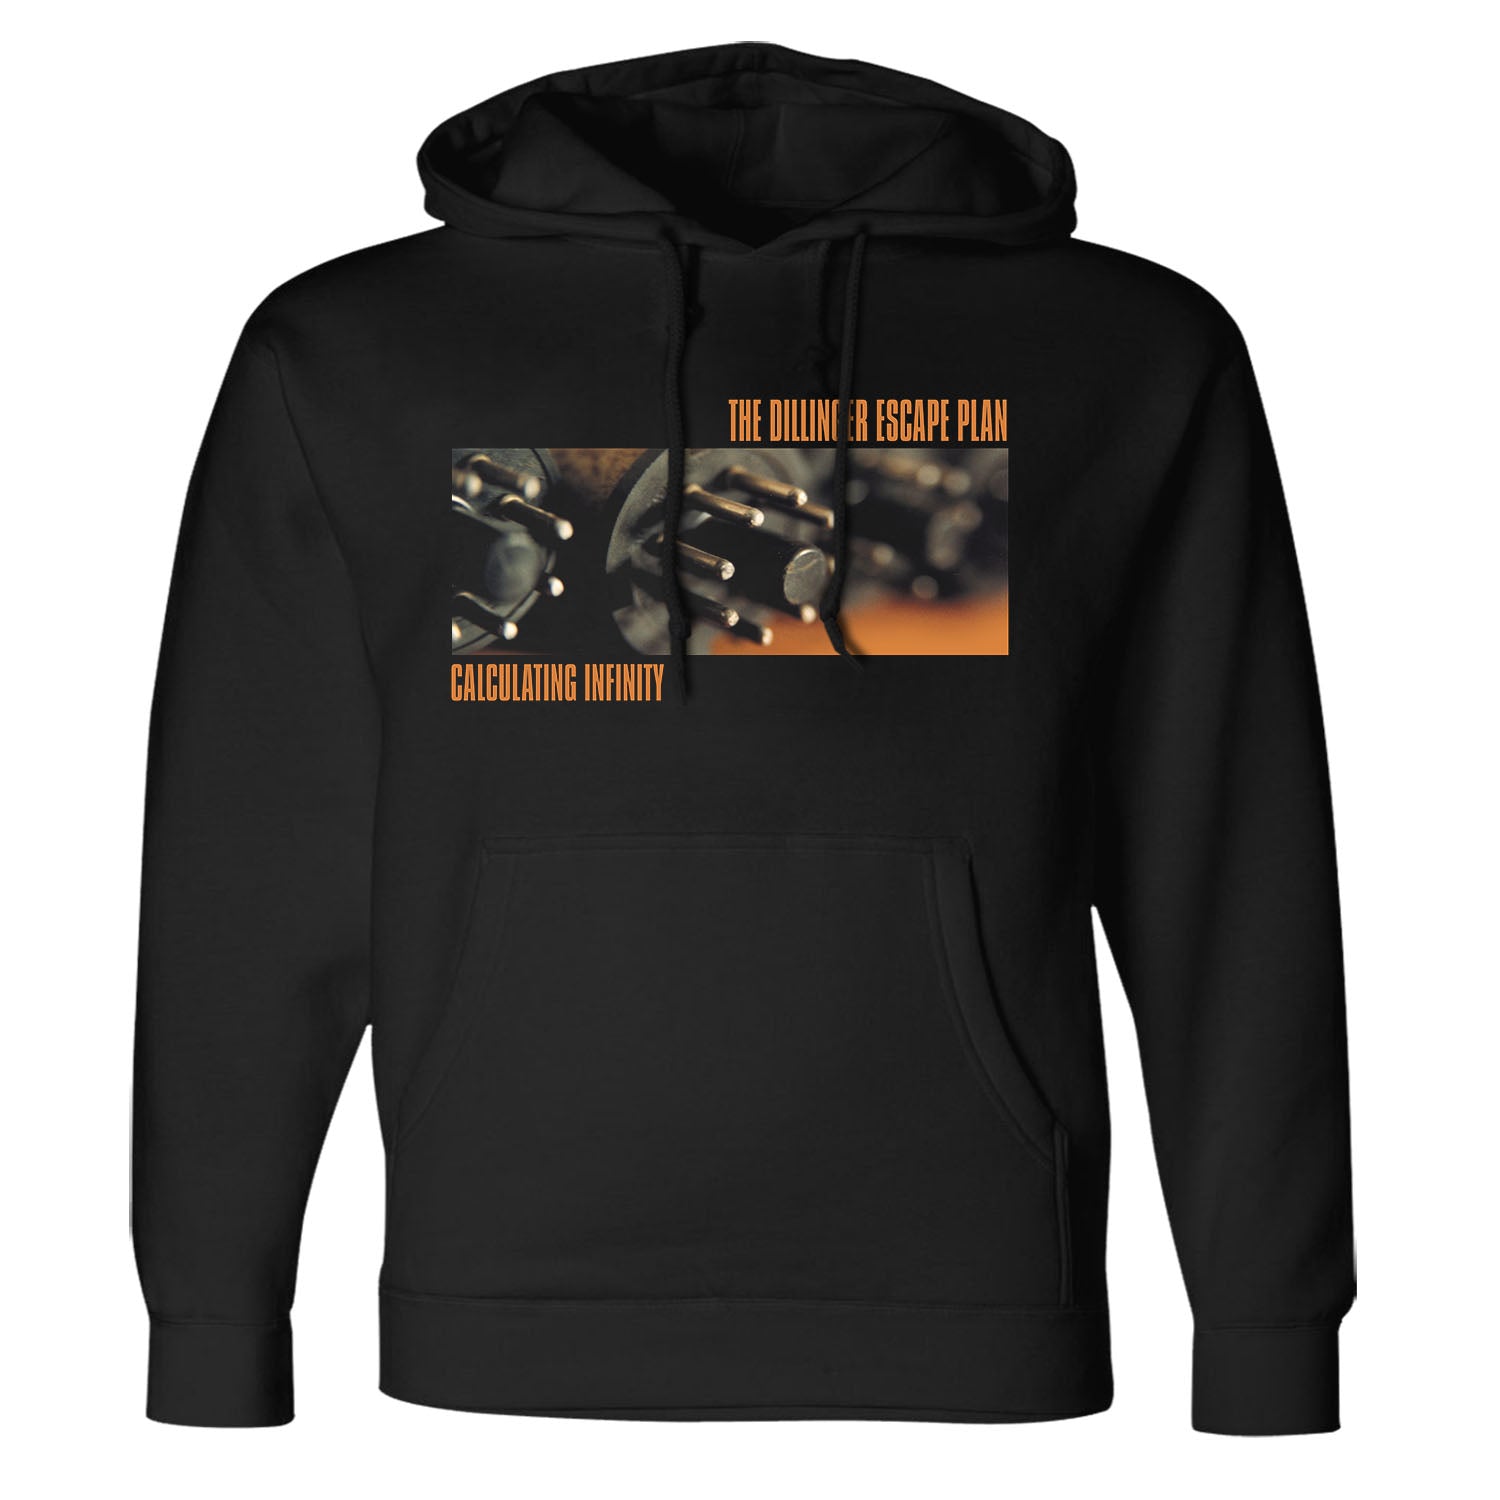 The Dillinger Escape Plan "Calculating Infinity" Pullover Hoodie